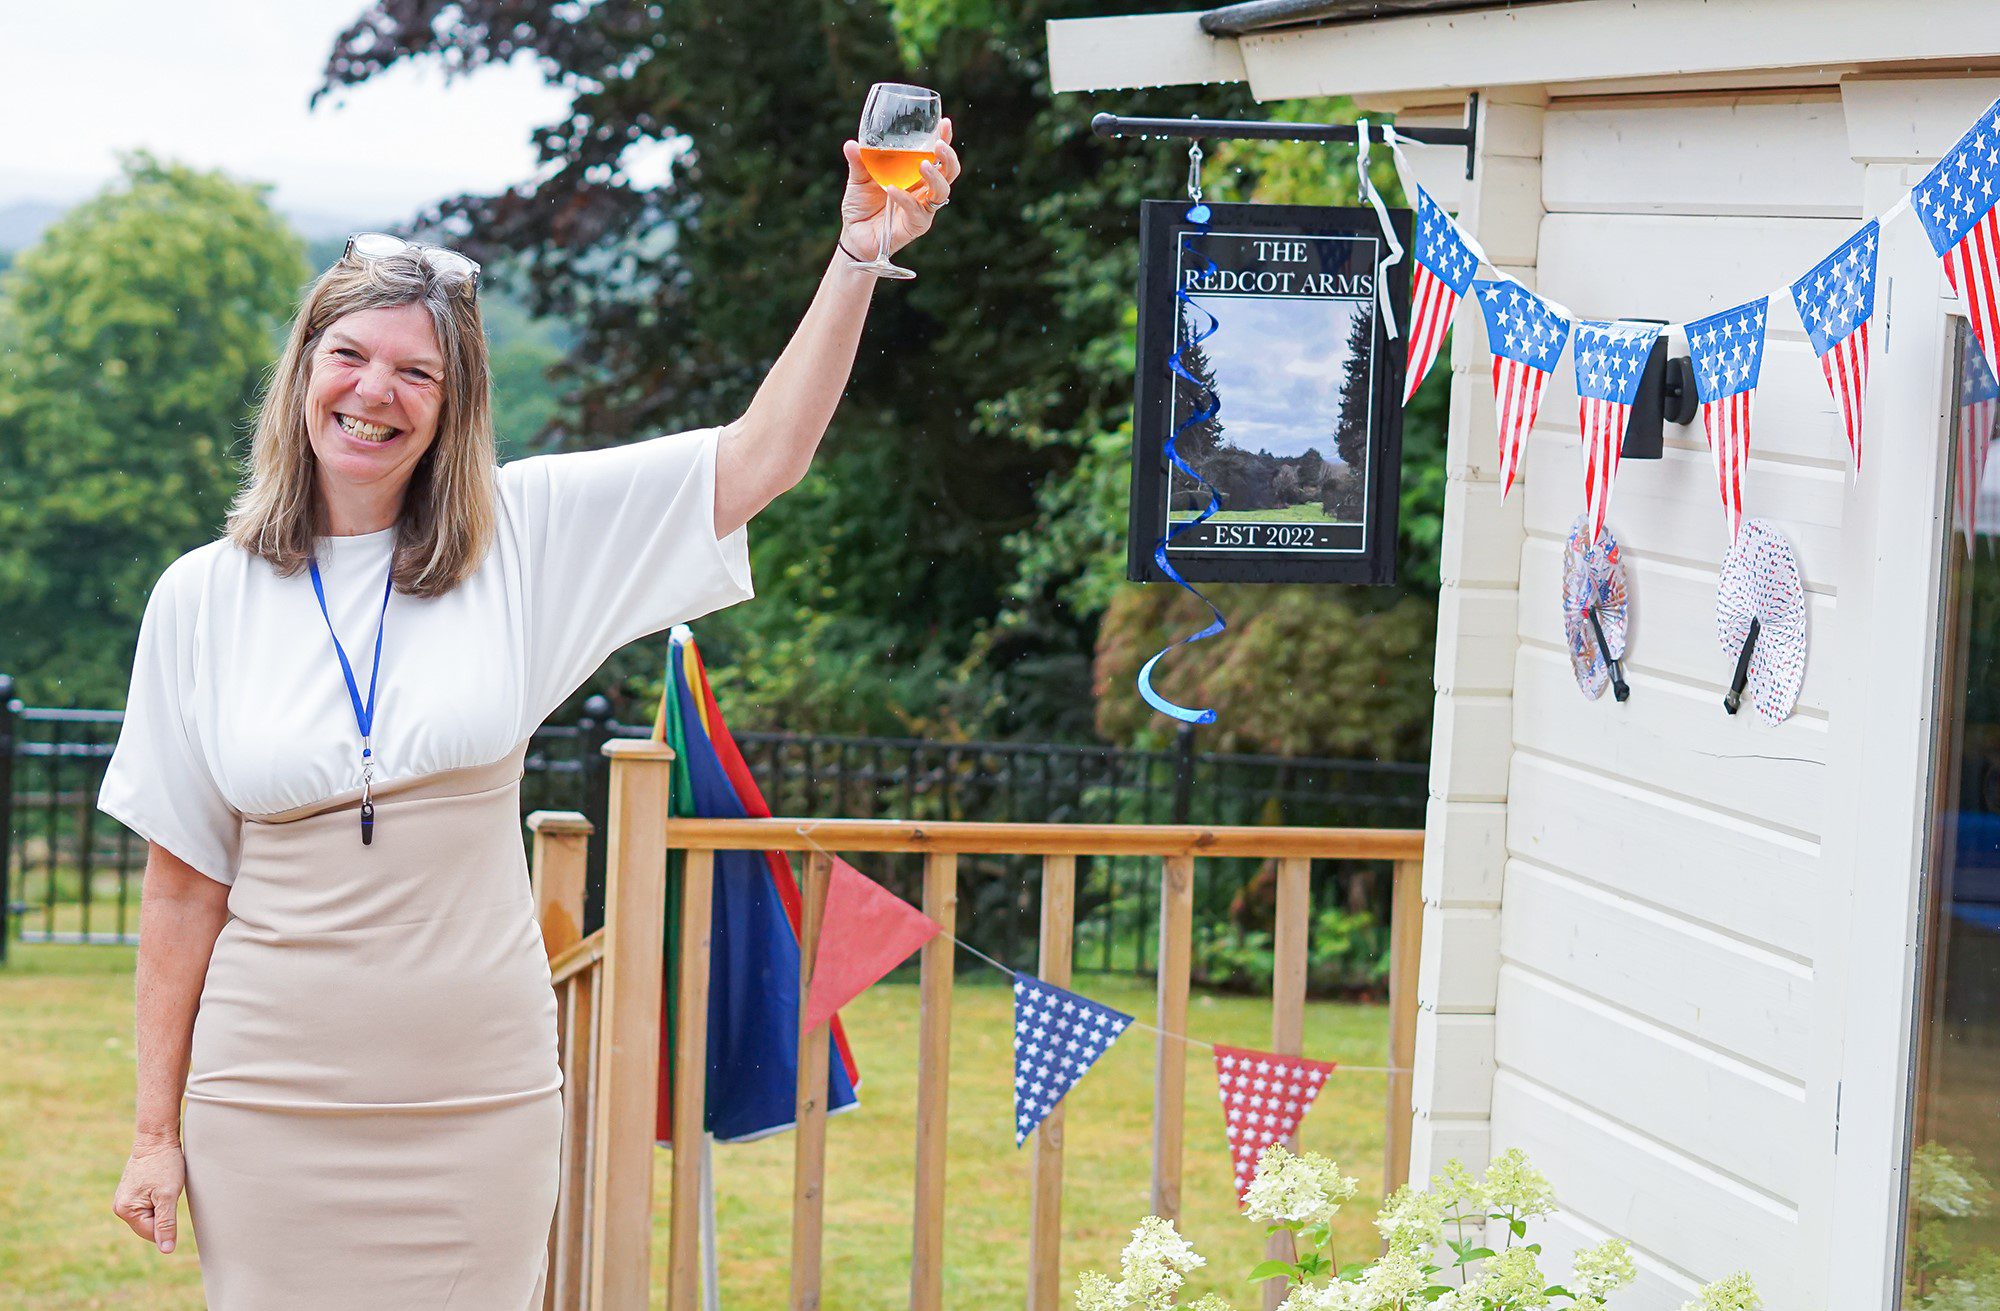 Open Day at Redcot - Jan Daly the Care Home Manager toasting at the care home's pub